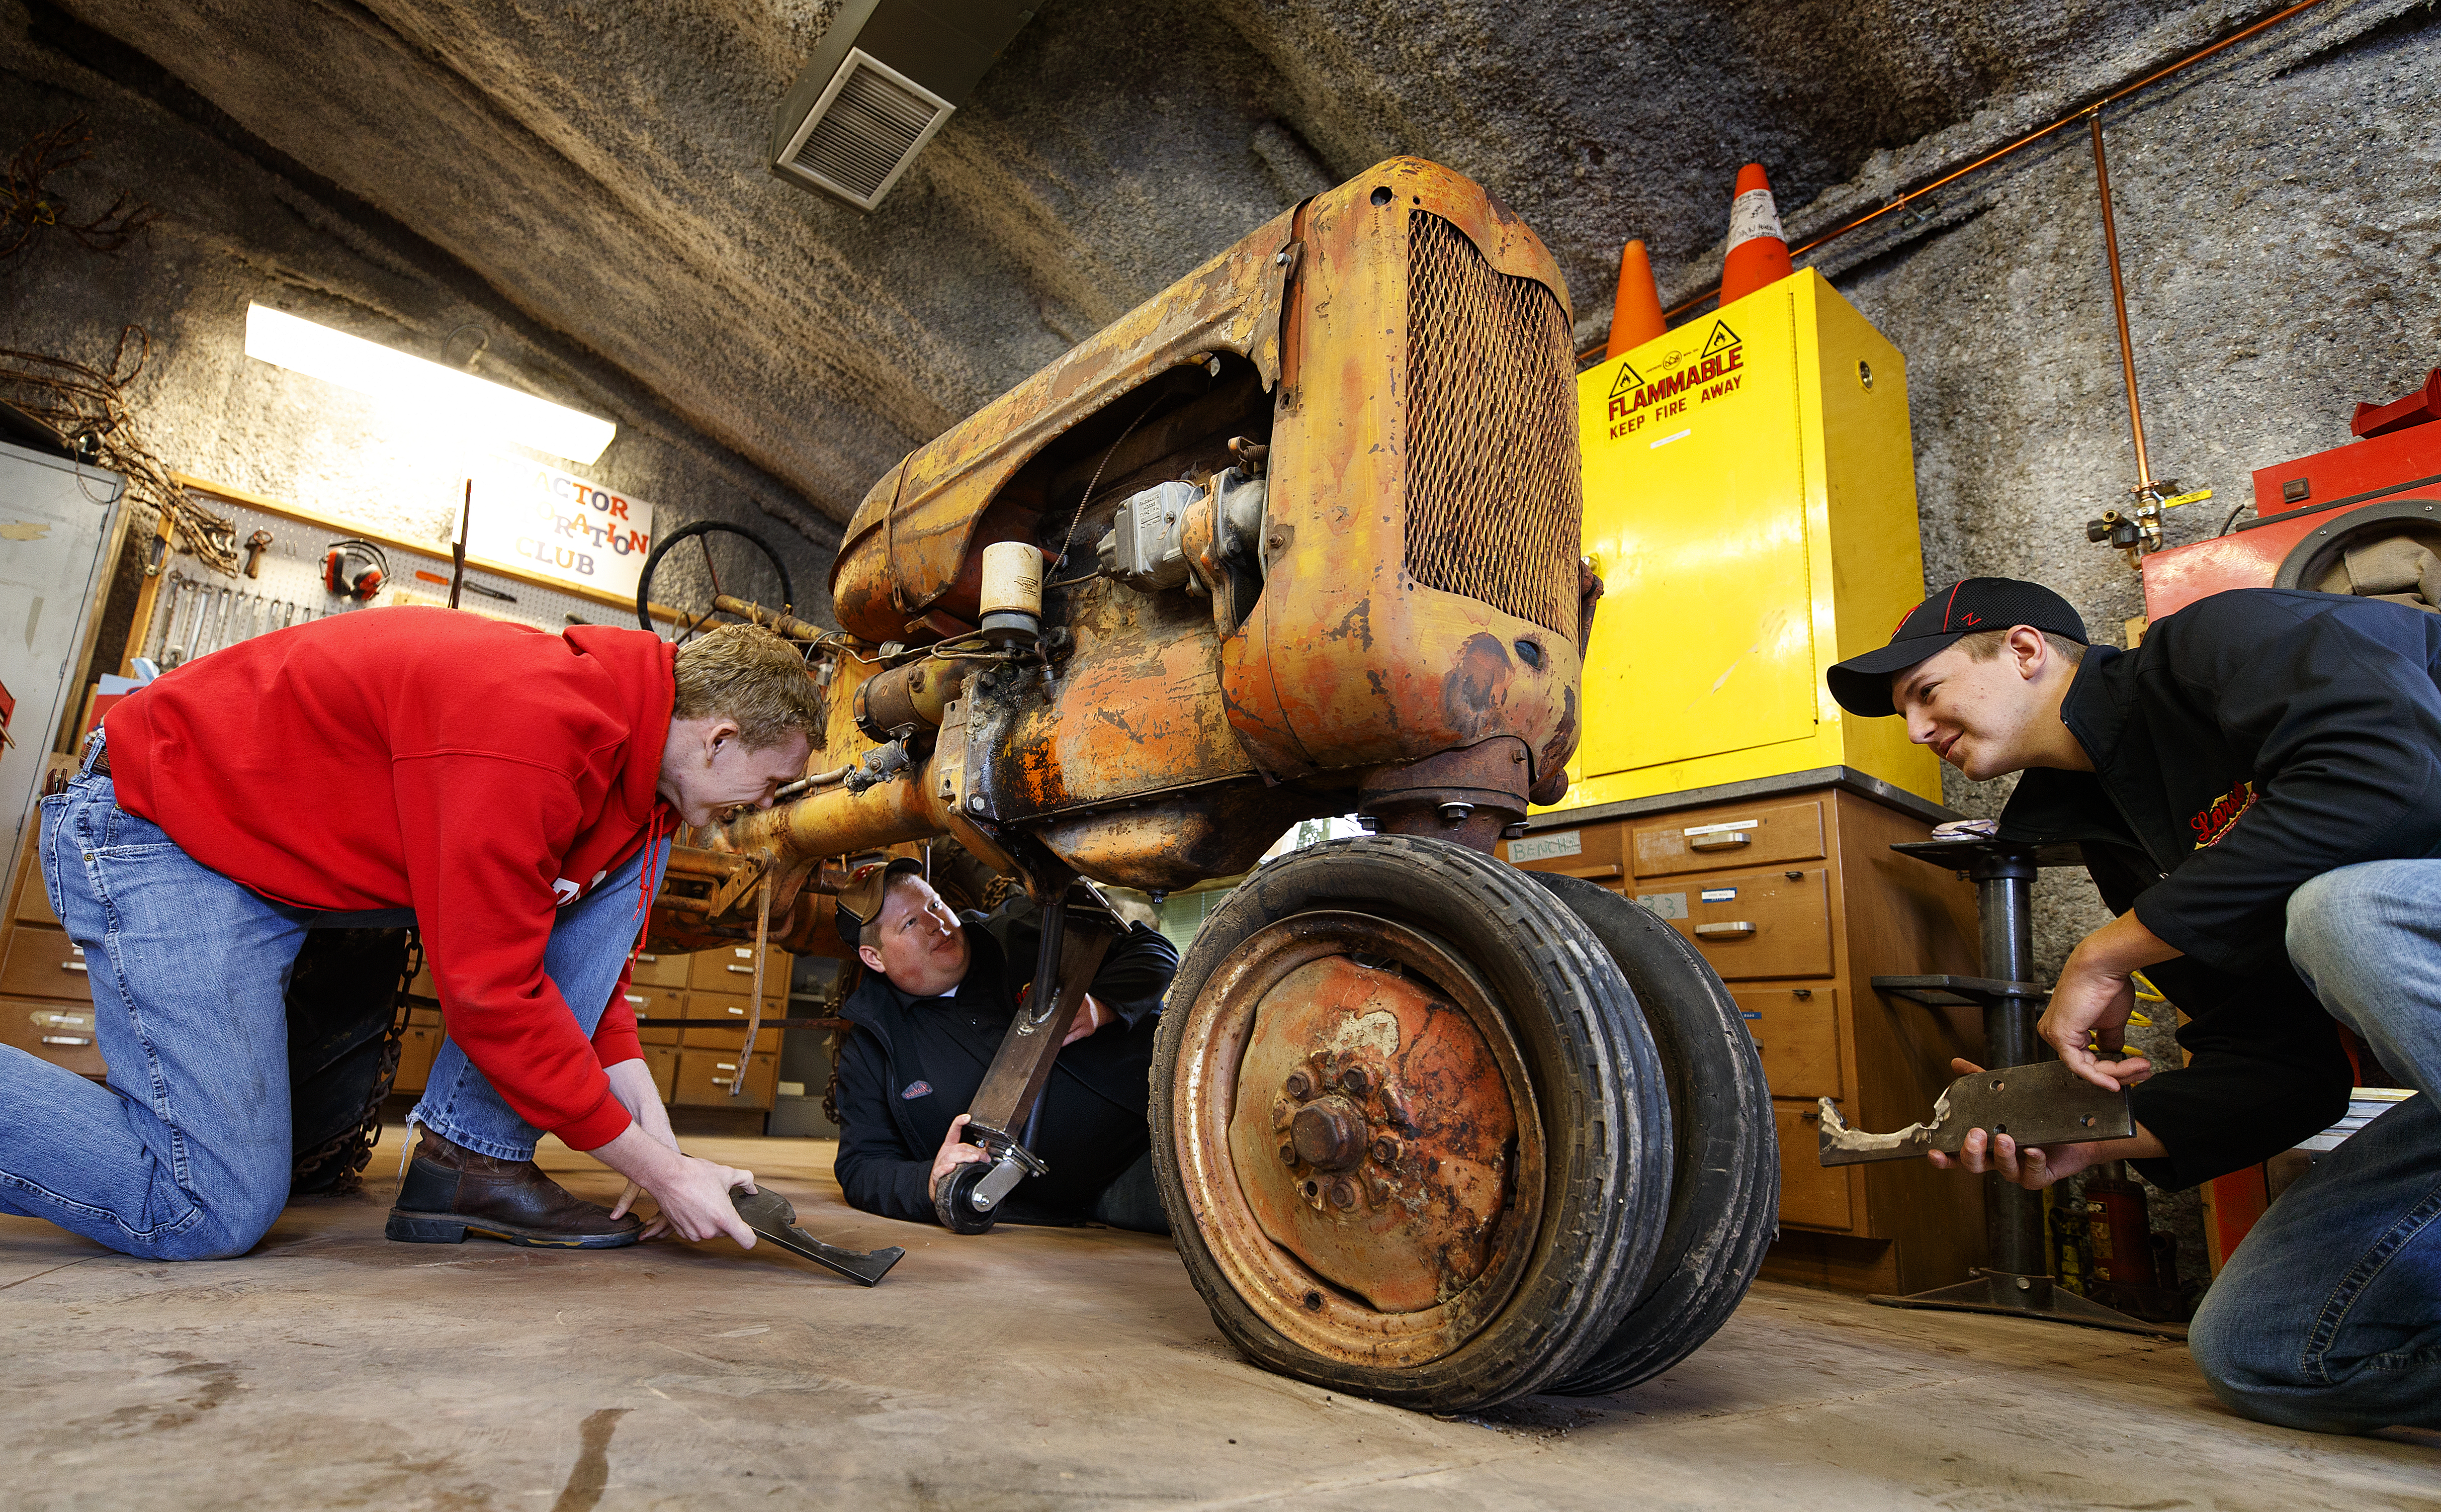 Tractor Restoration Club members (from left) Kiel Kruse, Joshua Bauer and Jaythan Scheideler work with support pieces that will be attached to the 1945 Allis Chalmers Model C so it can be moved around for restoration work. Club members are preparing the tractor for display at the Homestead National Monument of America near Beatrice.